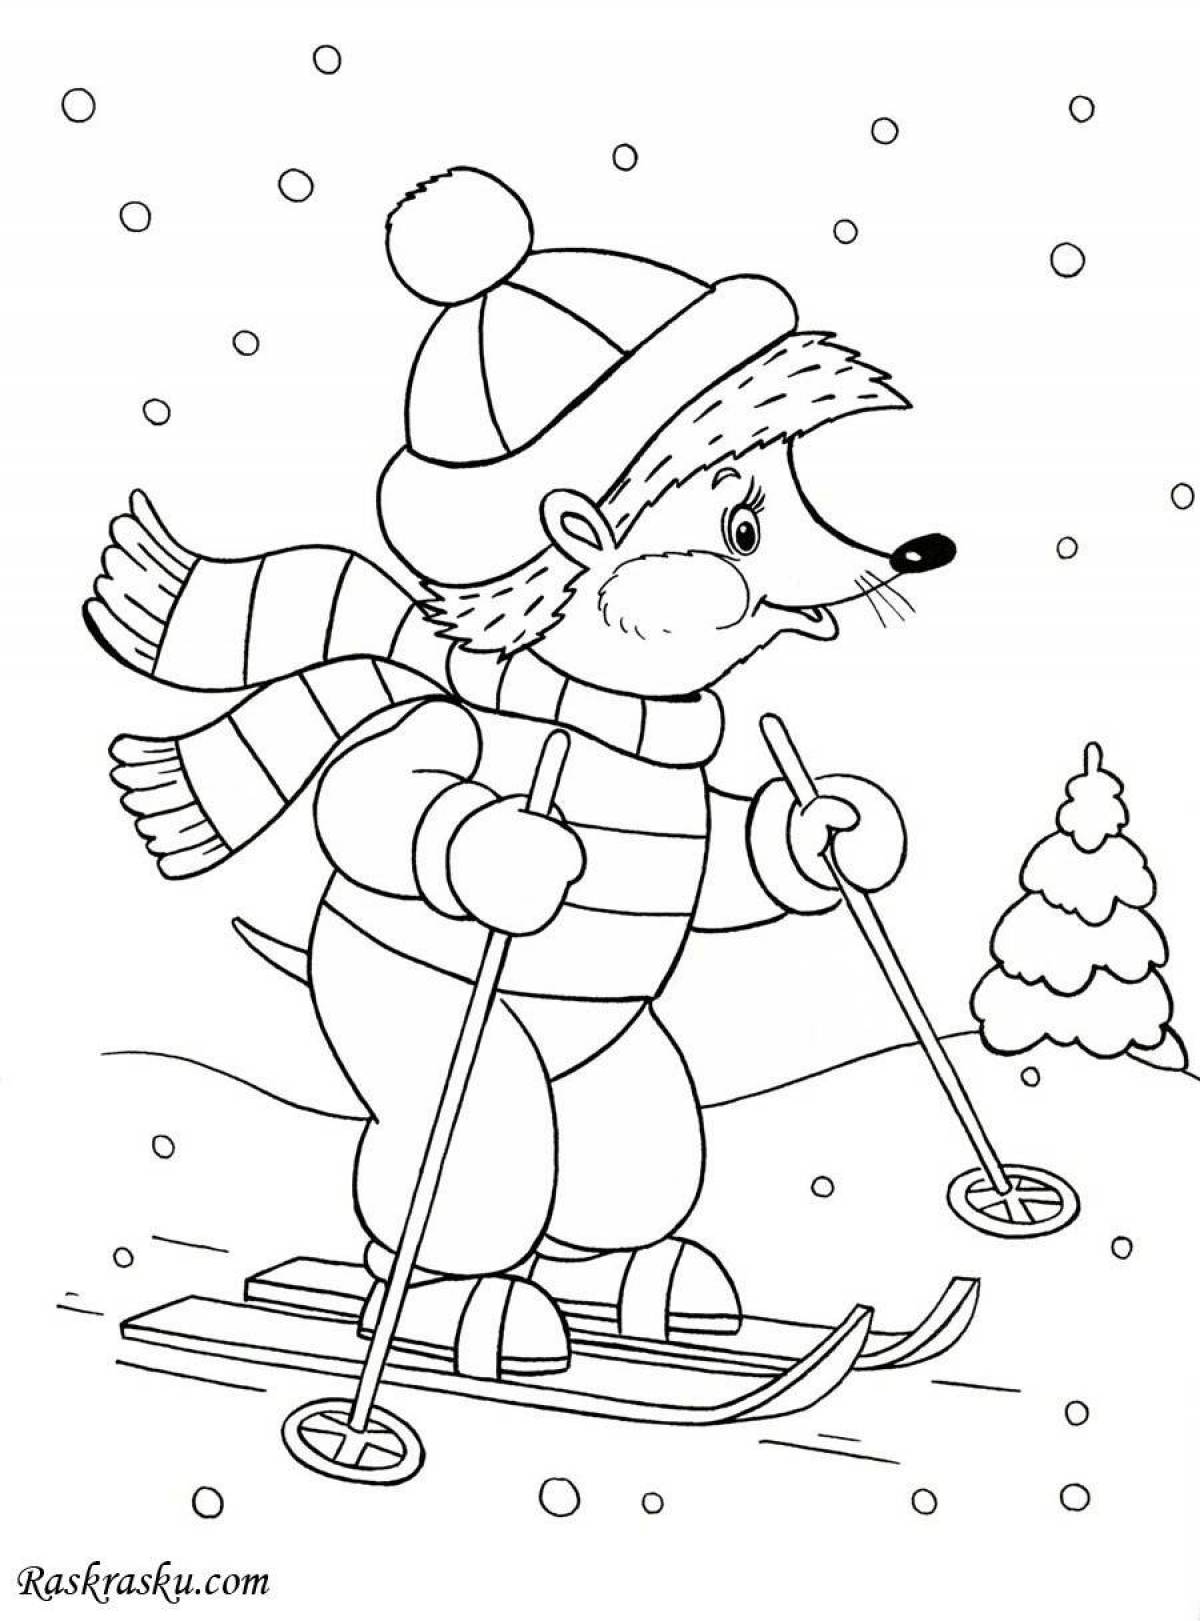 Amazing winter fun coloring book for kids 3-4 years old